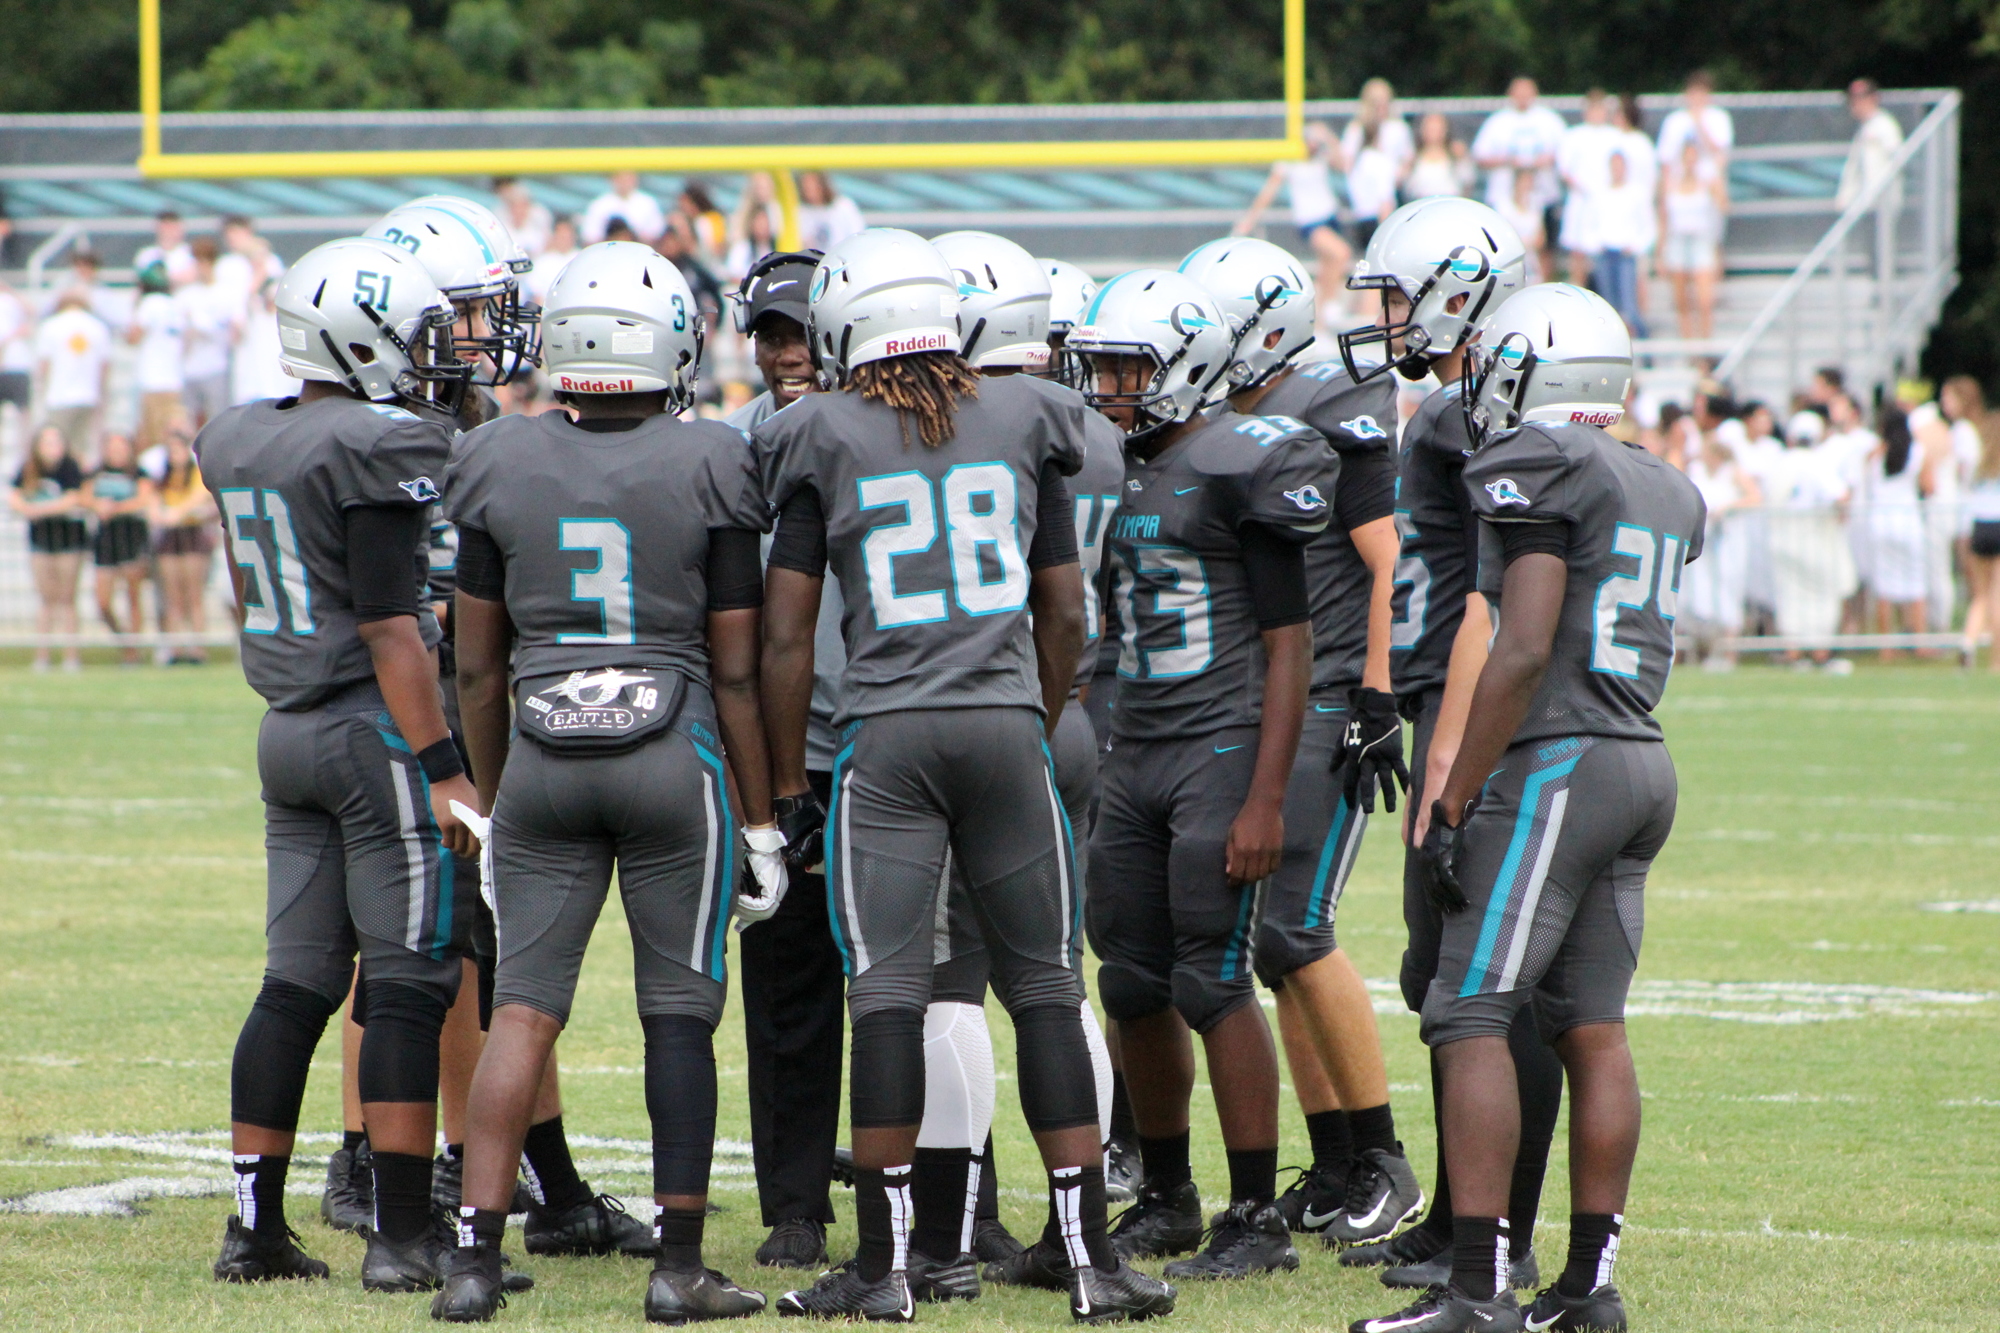 The Titans struggled in their season opener against West Orange. Photo by Chris Mayer